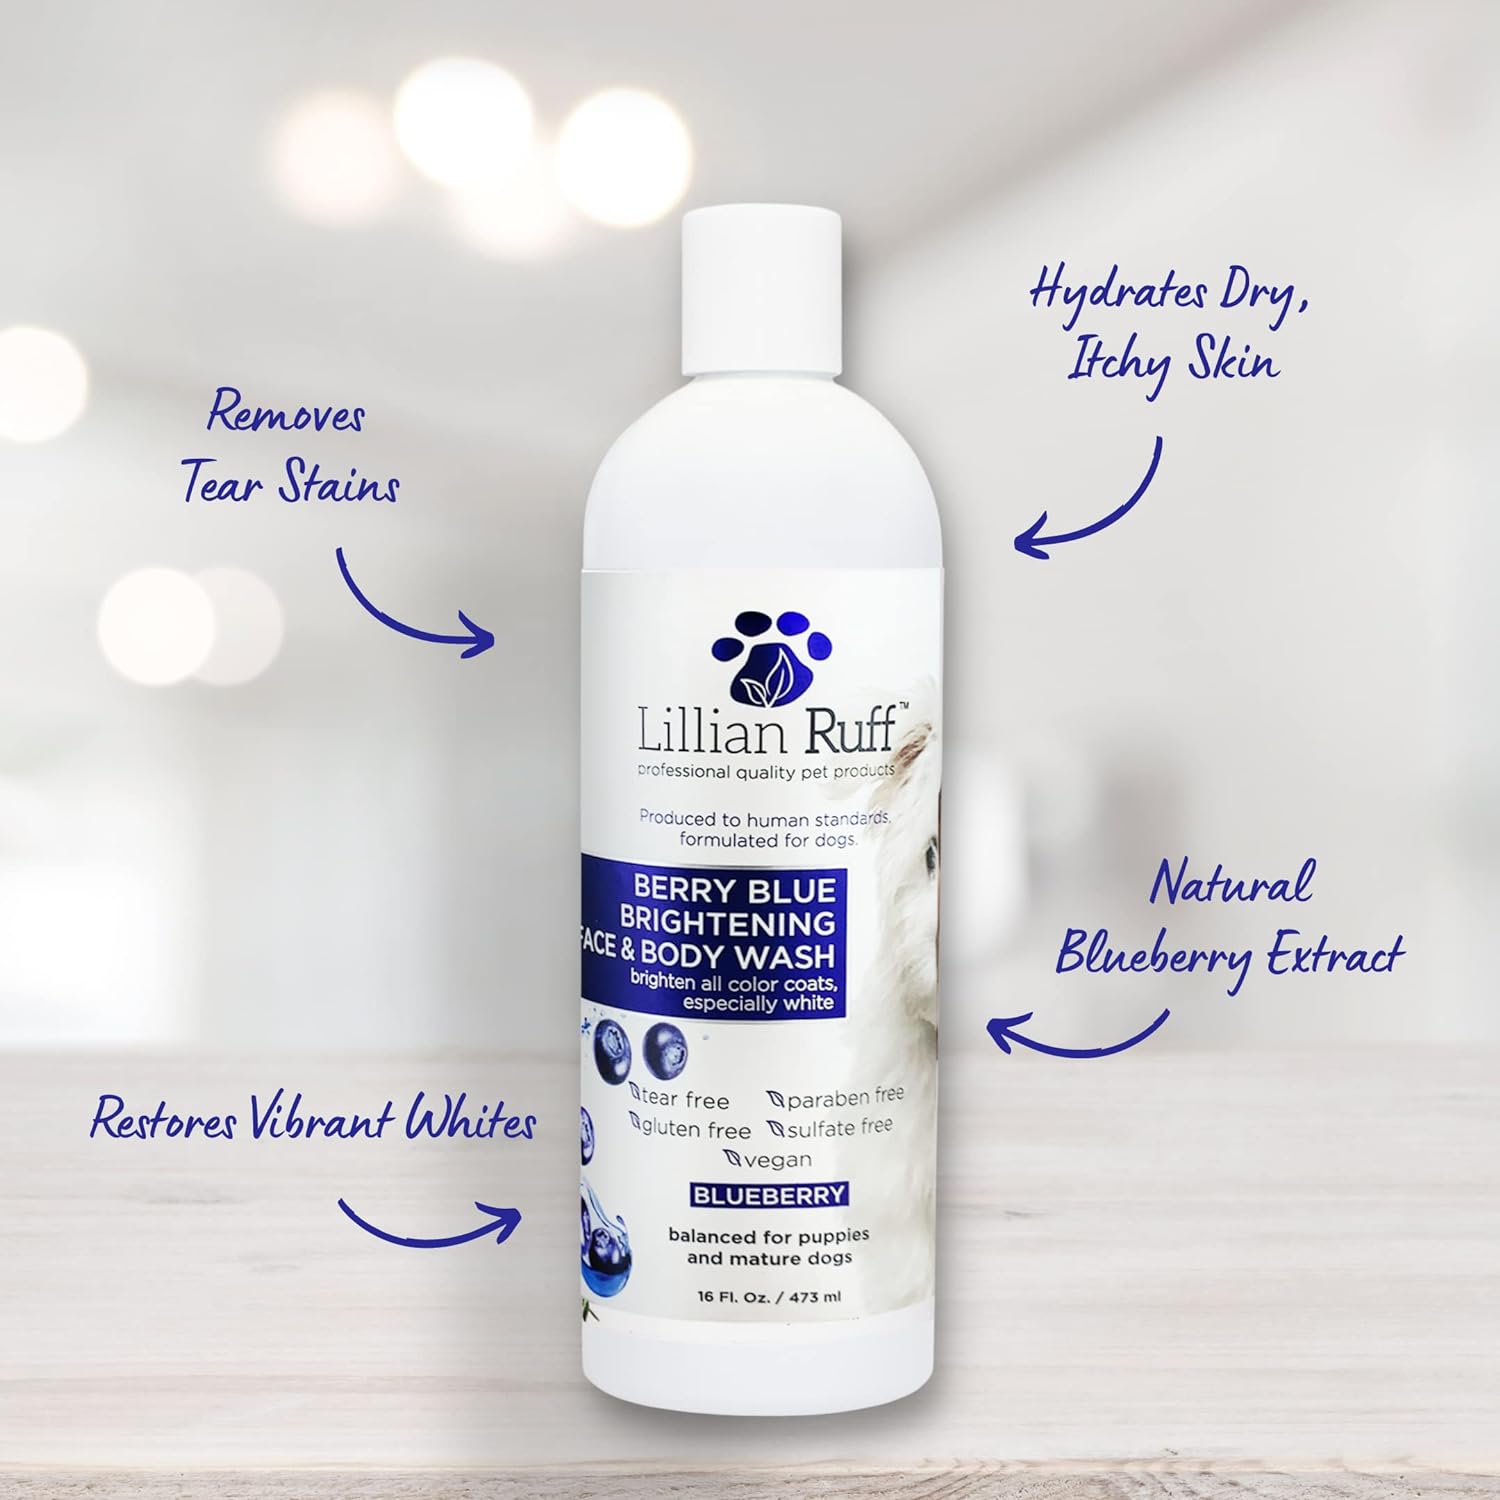 Lillian Ruff Berry Blue Brightening Face and Body Wash for Dogs - Blueberry Shampoo - Remove Tear Stains, Hydrate Dry Itchy Skin, Add Shine  Luster to Coats (Berry Blue Shampoo  Conditioner Set)